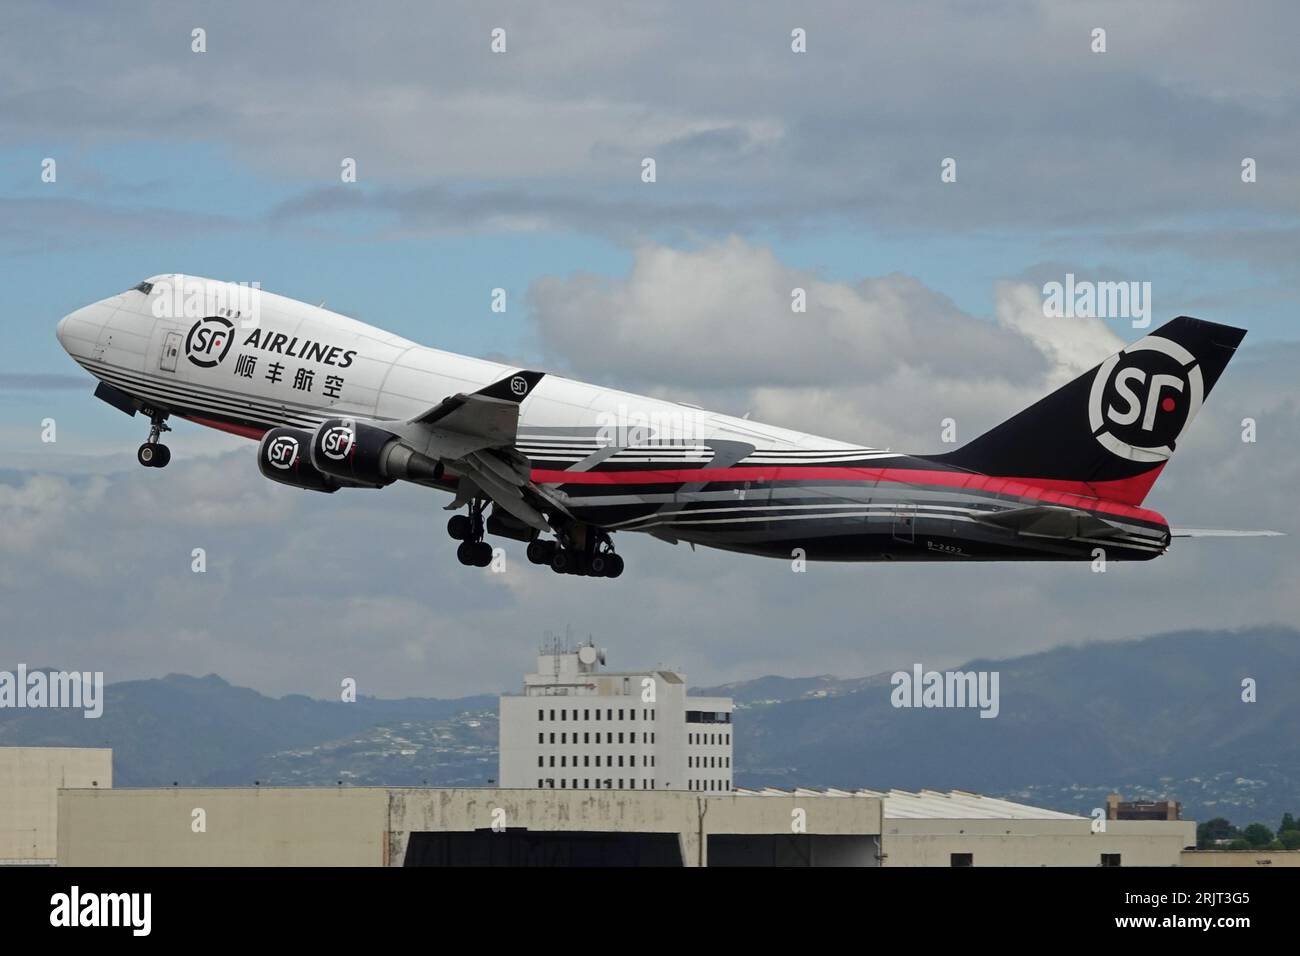 Los Angeles, California, USA - Aug. 21, 2023: A Boeing 747-400, operated by Chinese cargo shipping company SF Airlines, is shown taking off. Stock Photo